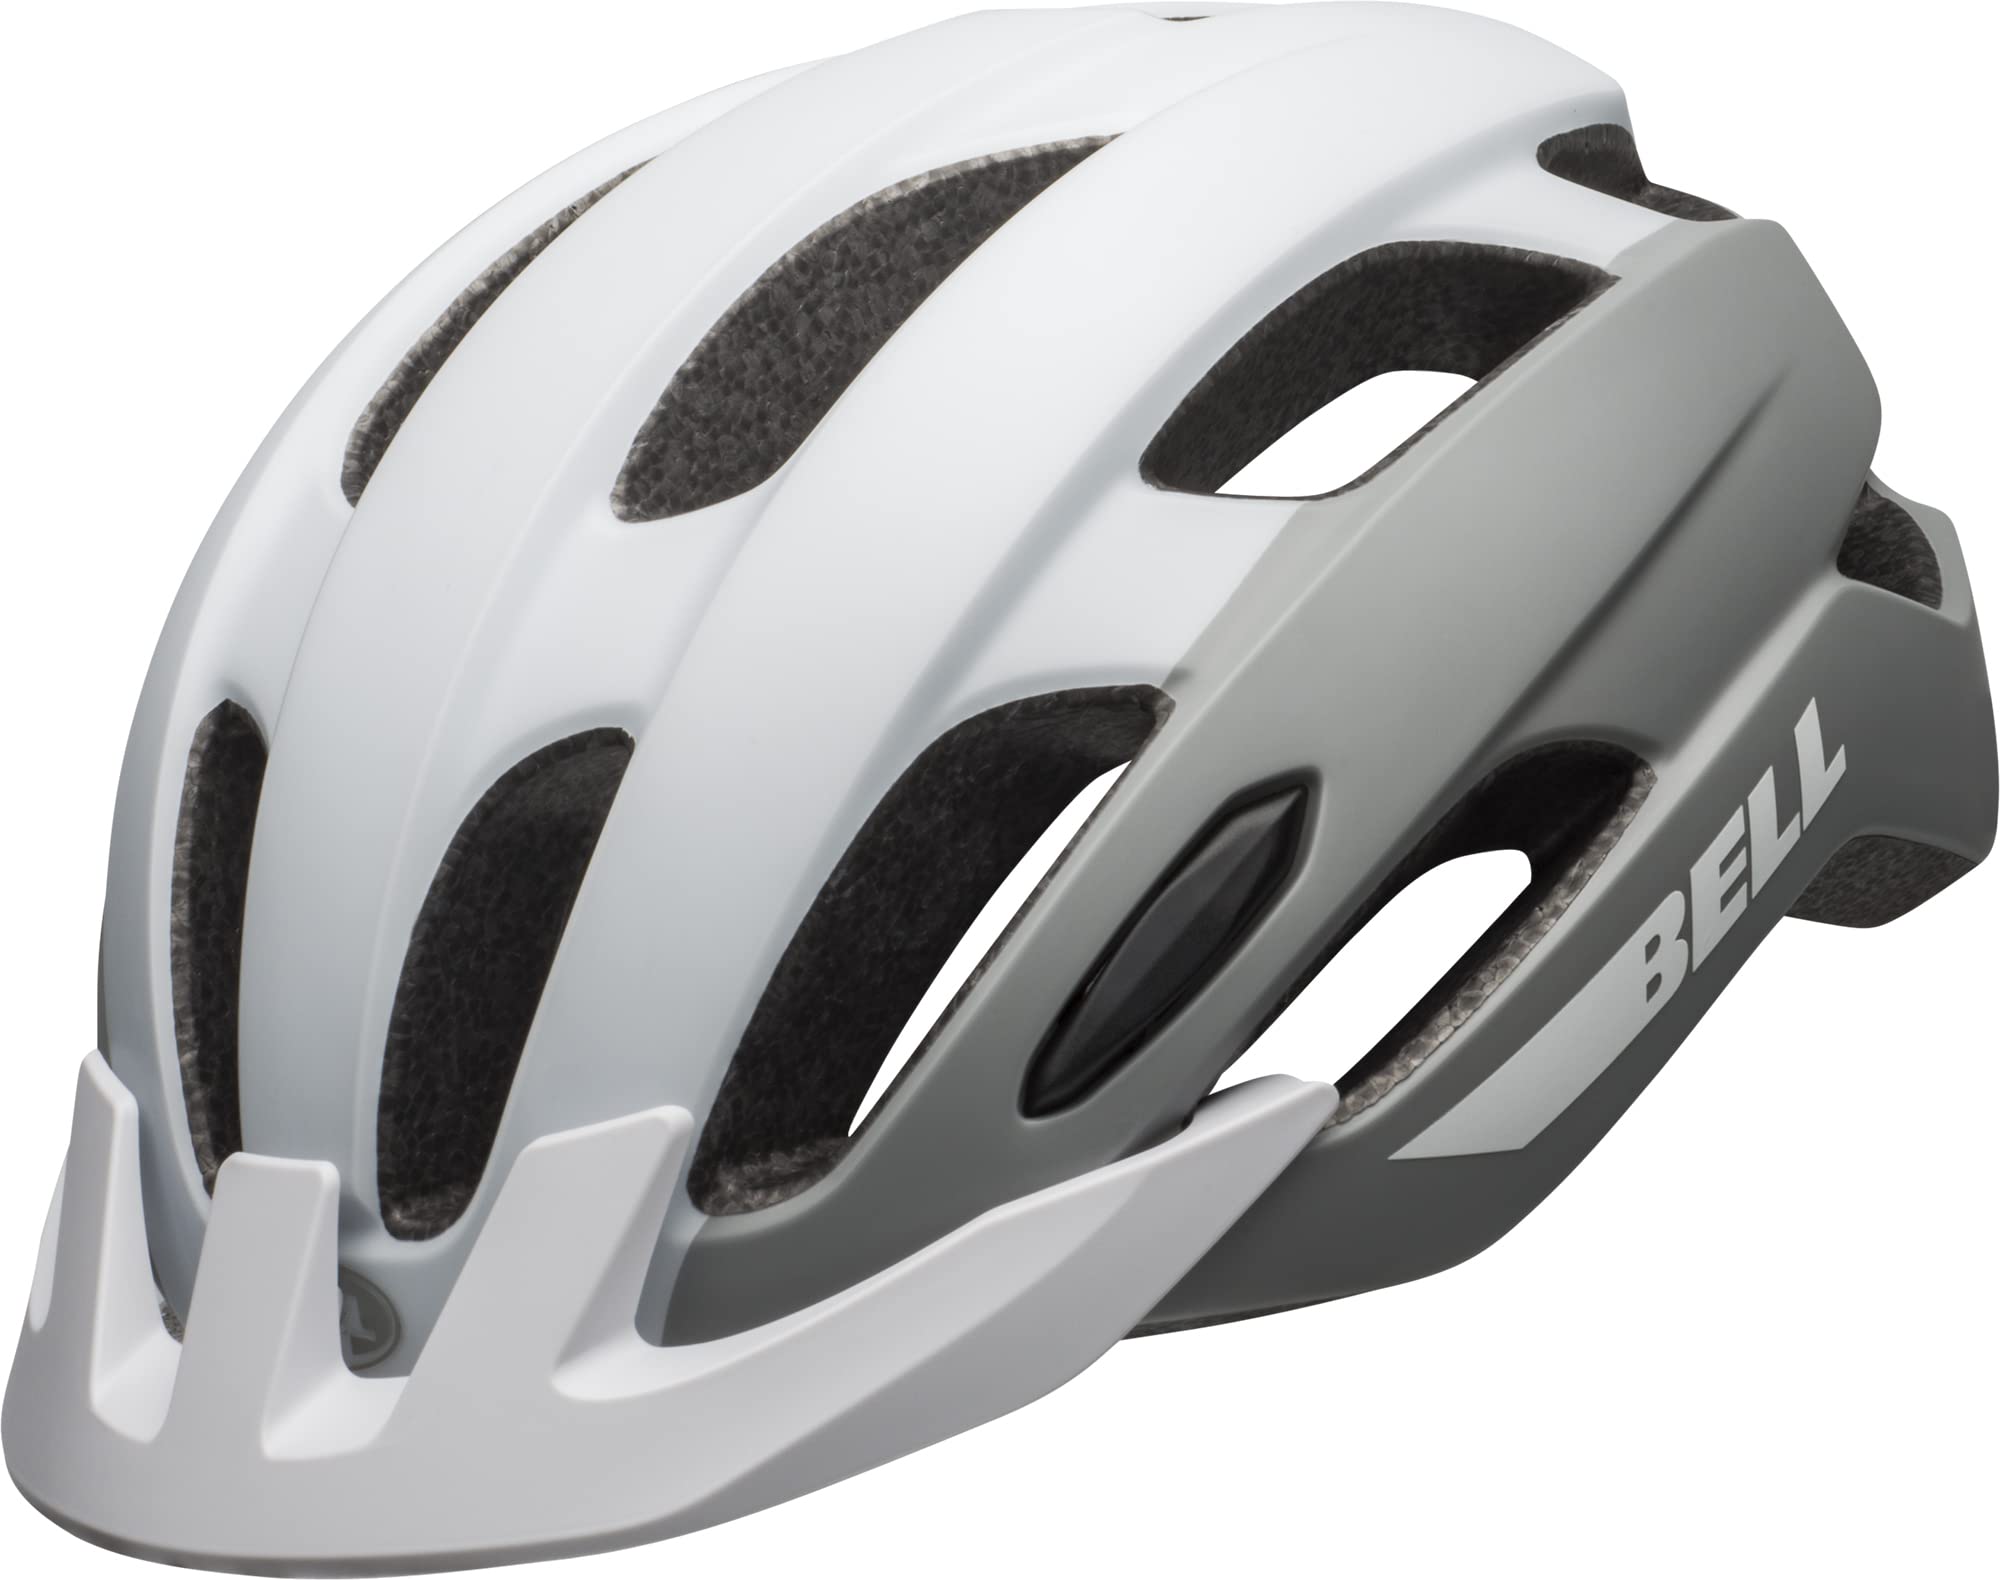 BELL Trace Adult Recreational Bike Helmet - Matte White/Silver (Discontinued), Universal Adult (53-60 cm)